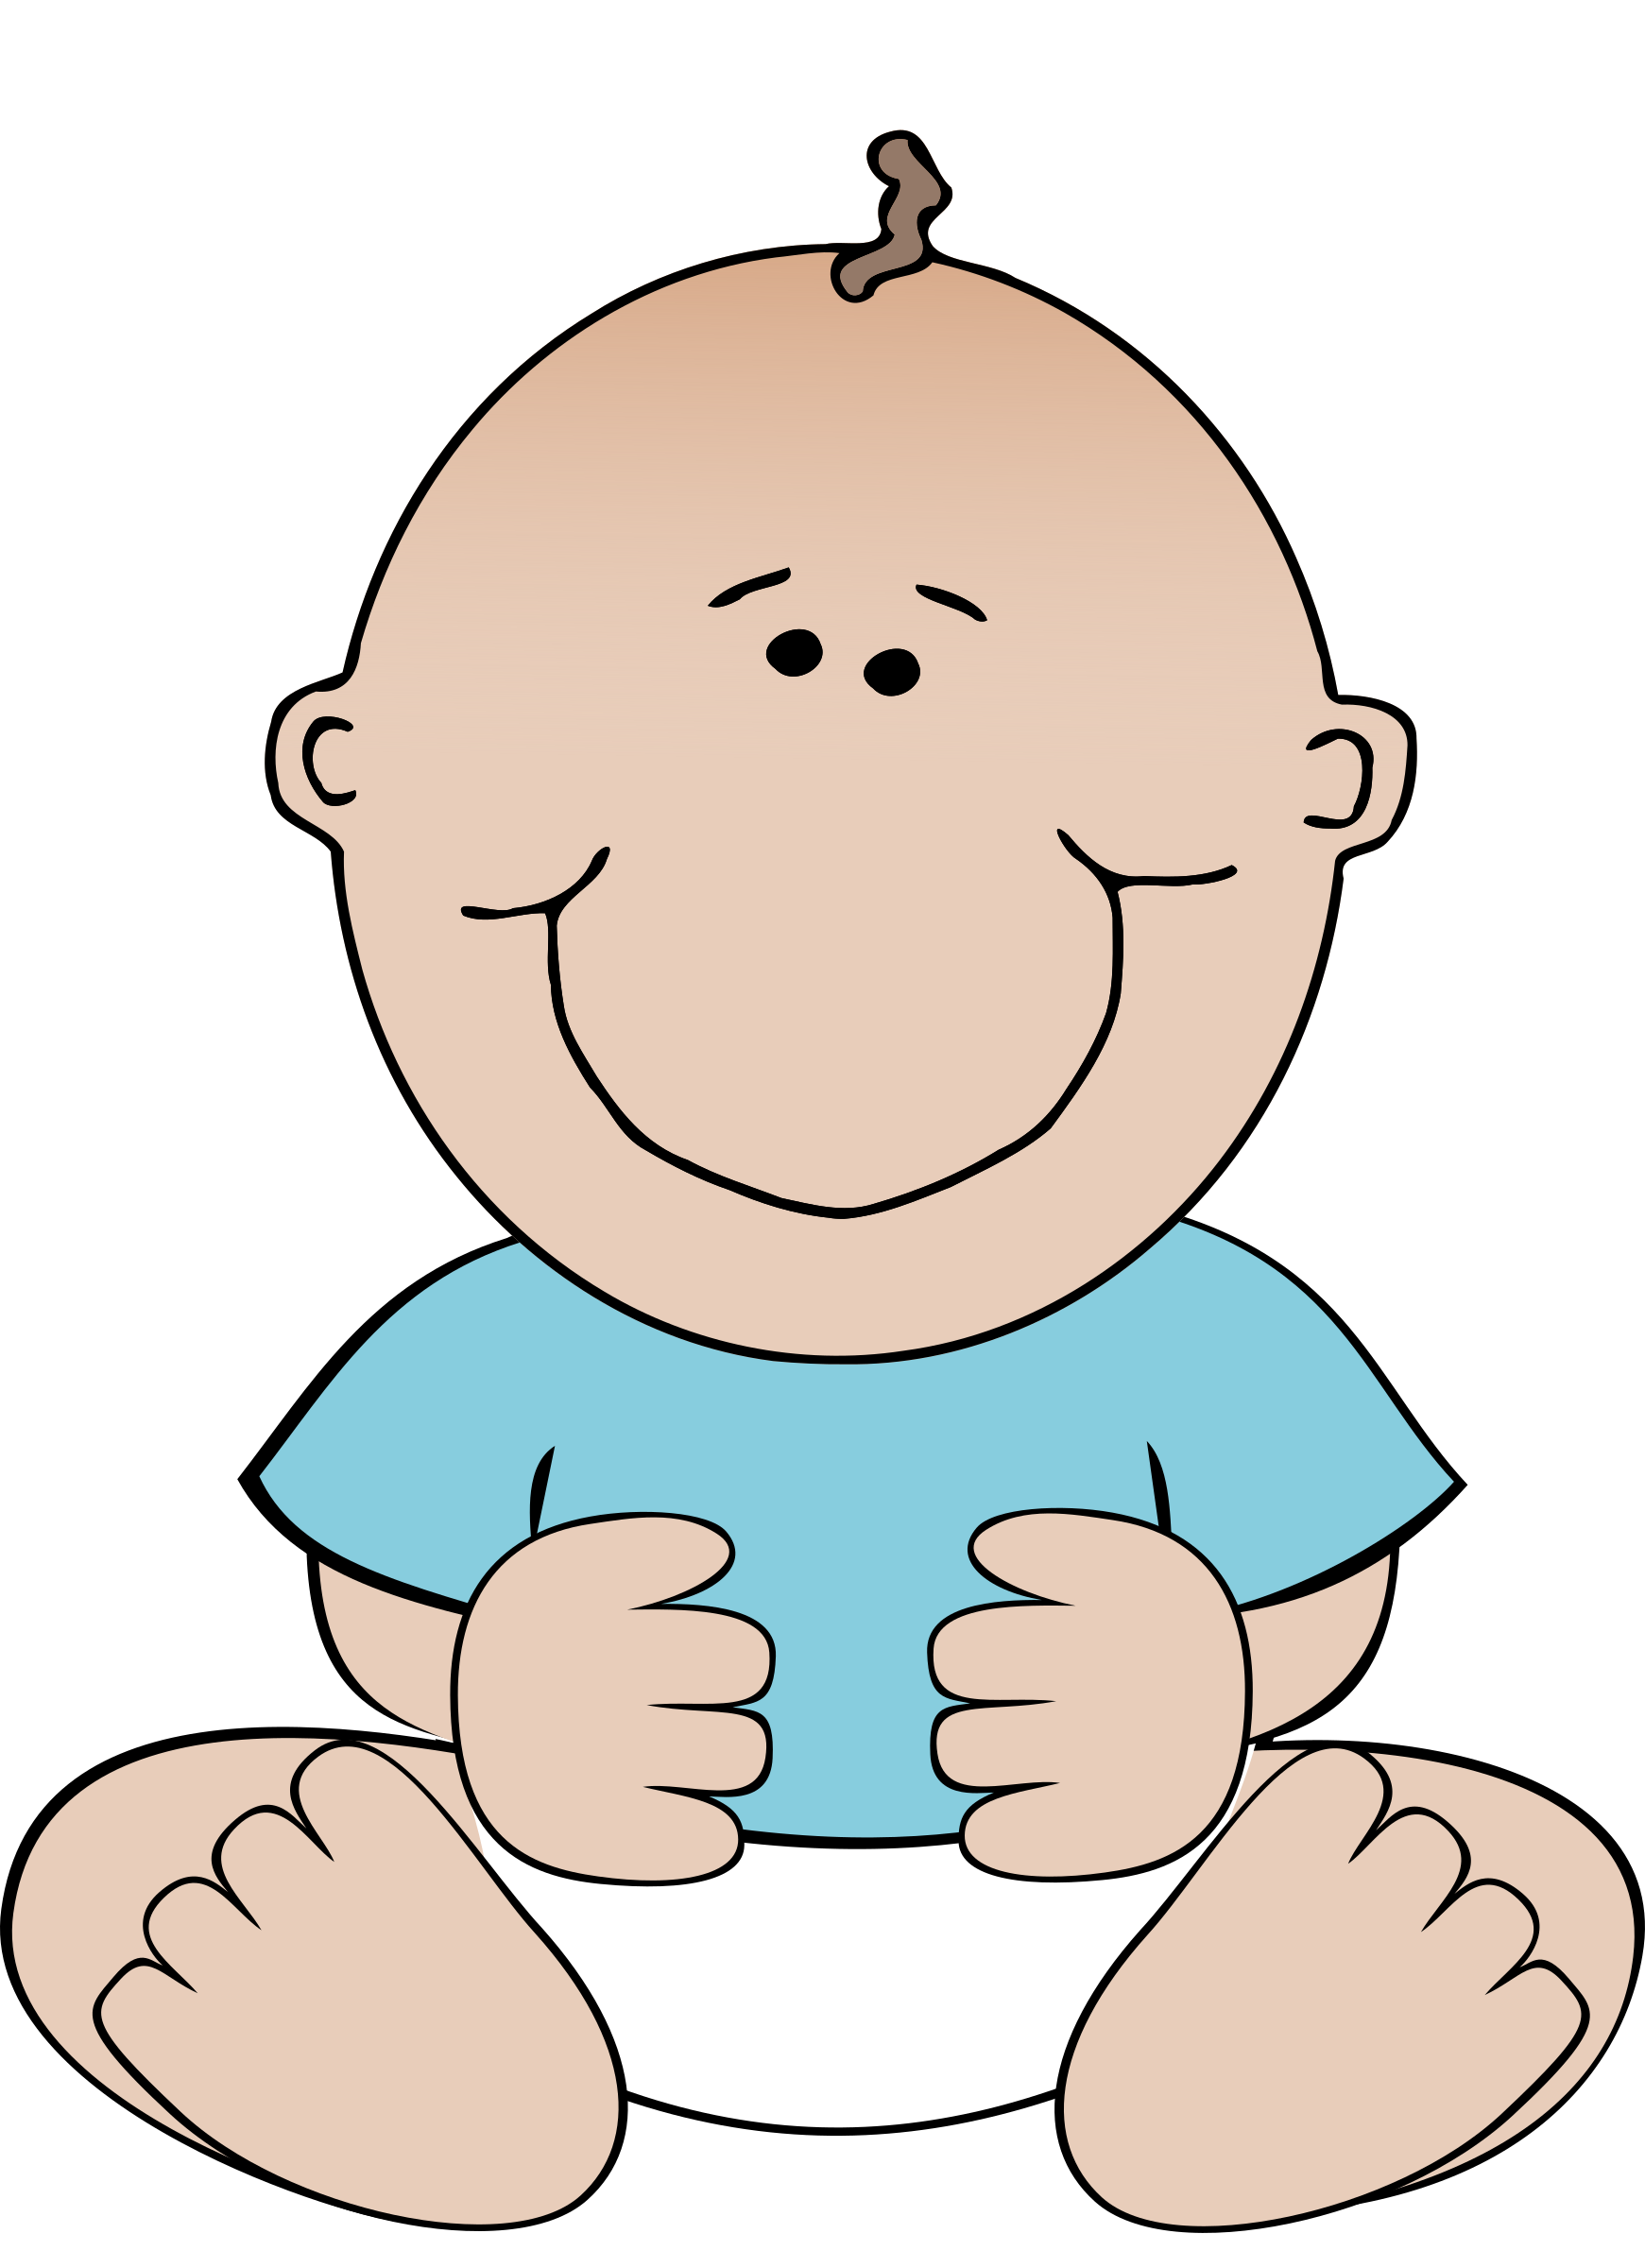 Diaper baby clipart to clipartllection free